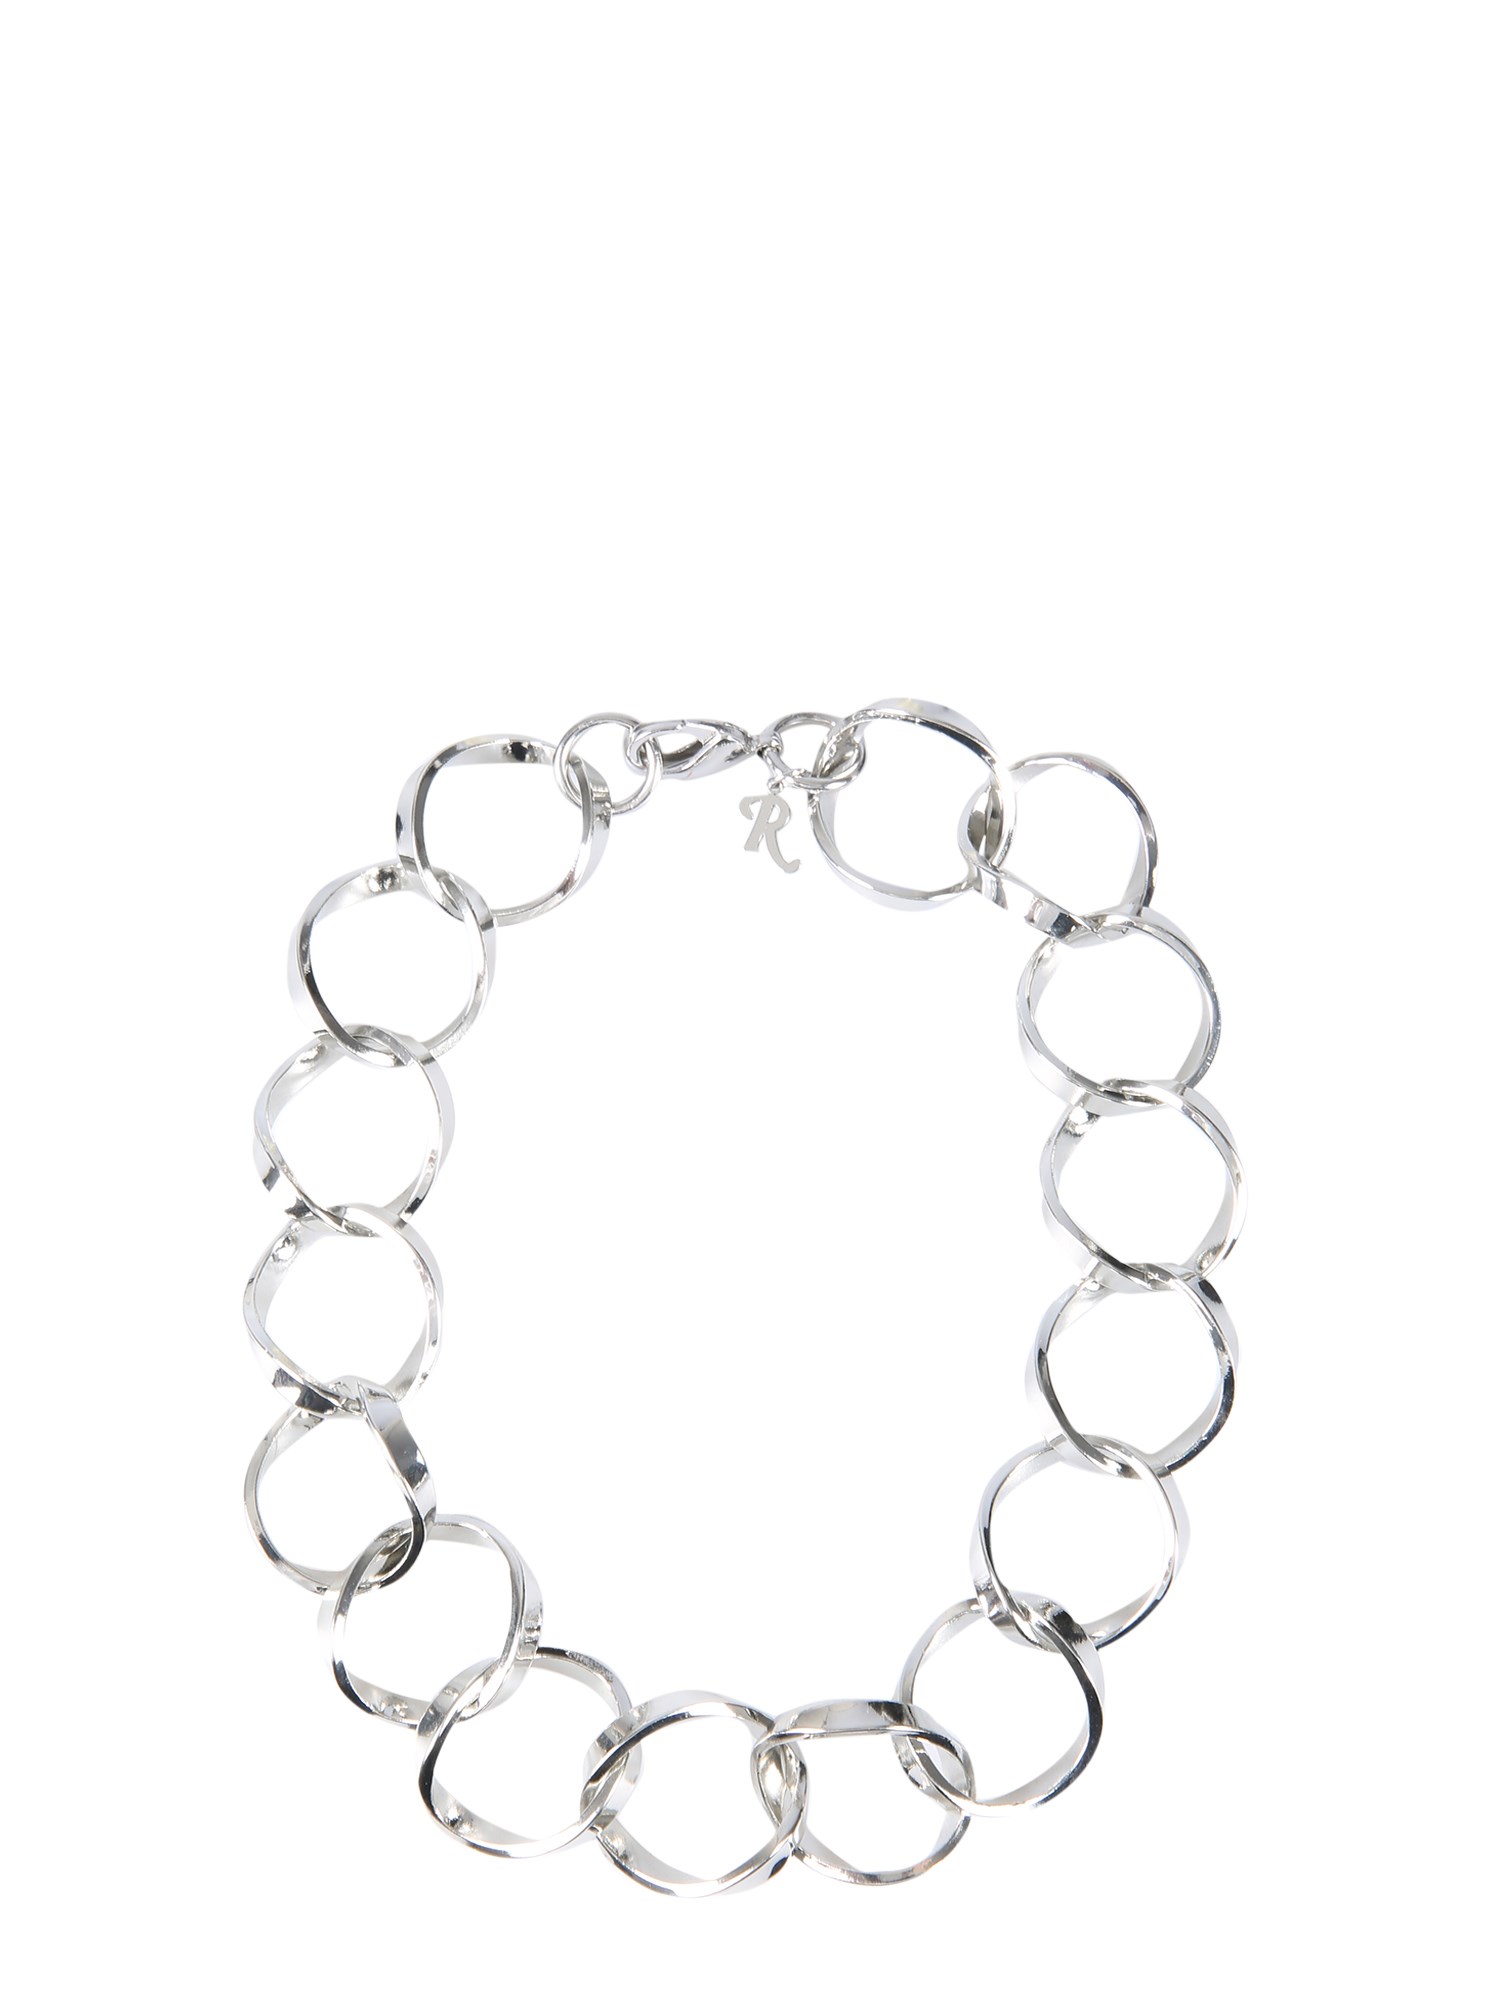 raf simons linked rings necklace